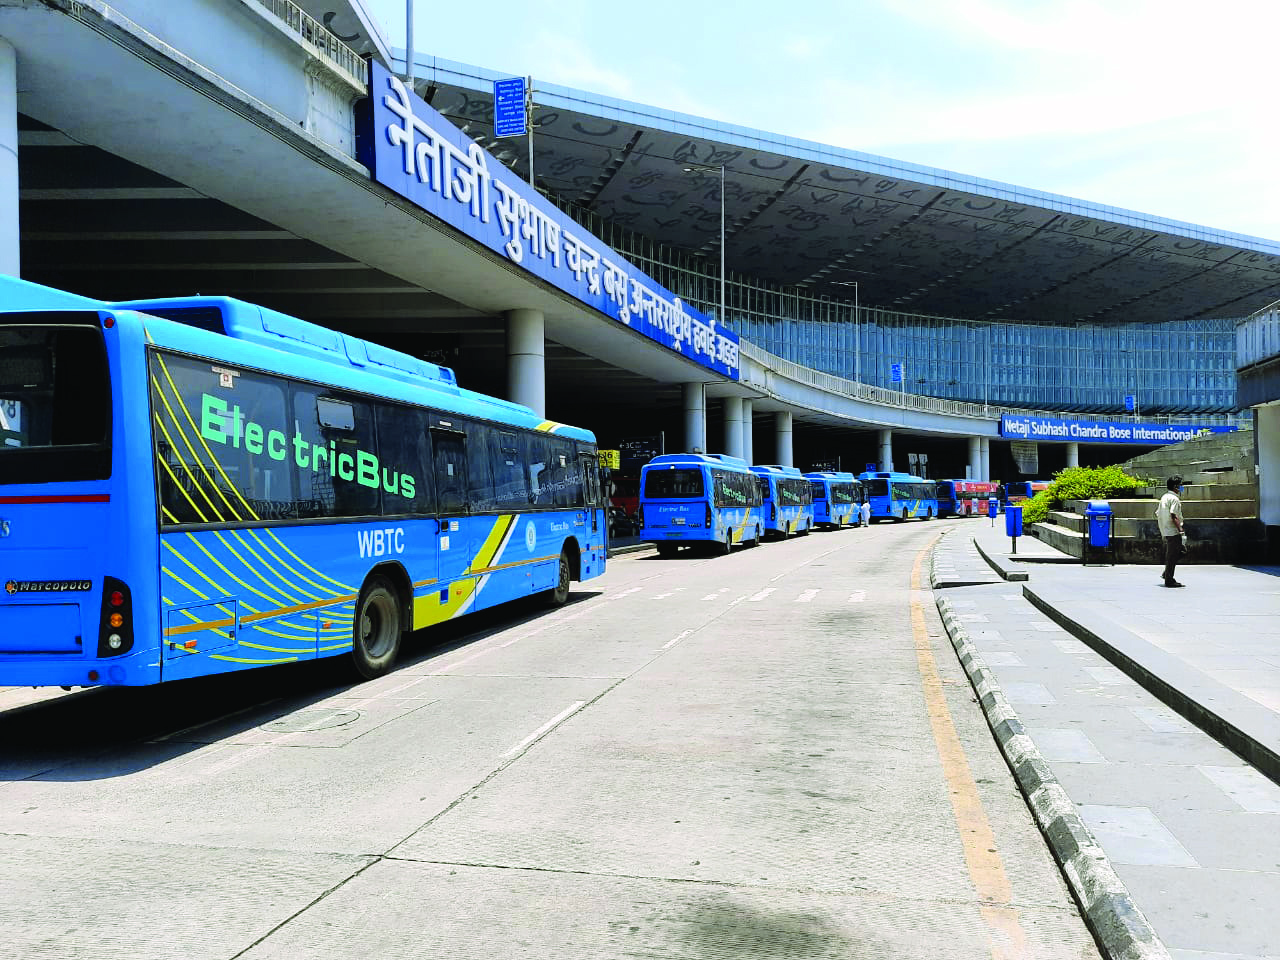 With growing number of electric buses, more charging points needed: Official